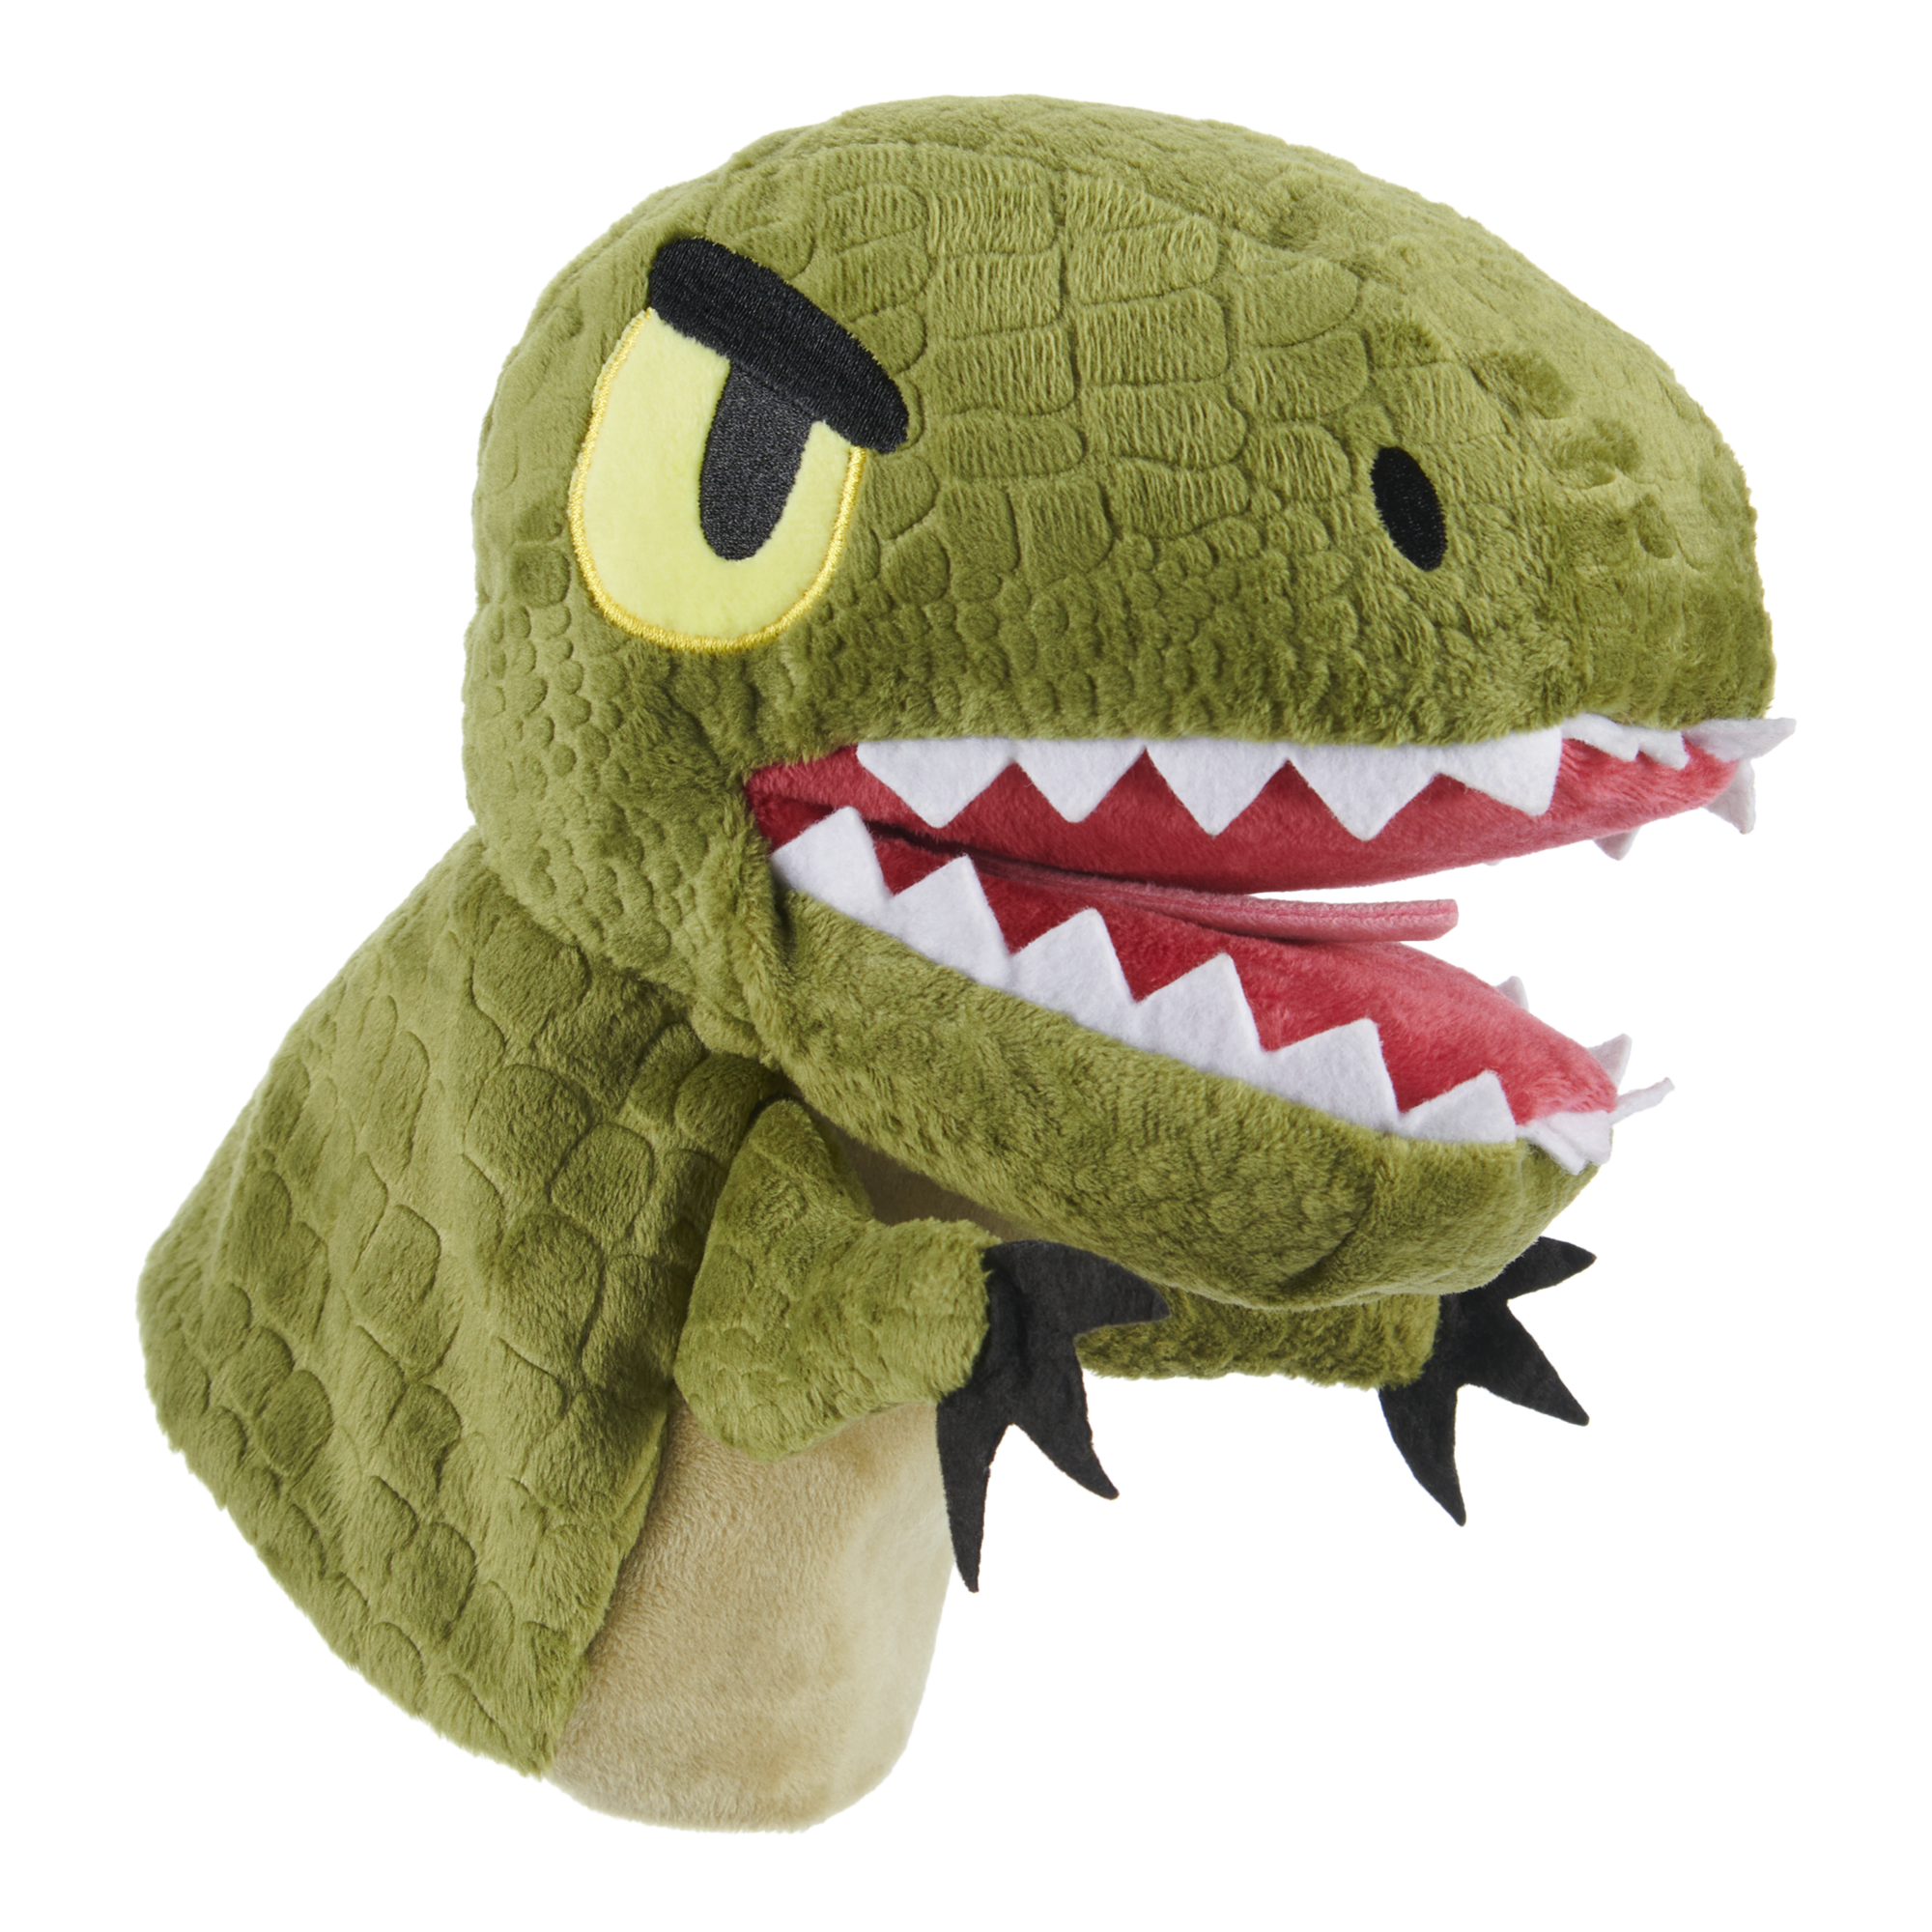 Clever Girl Puppet